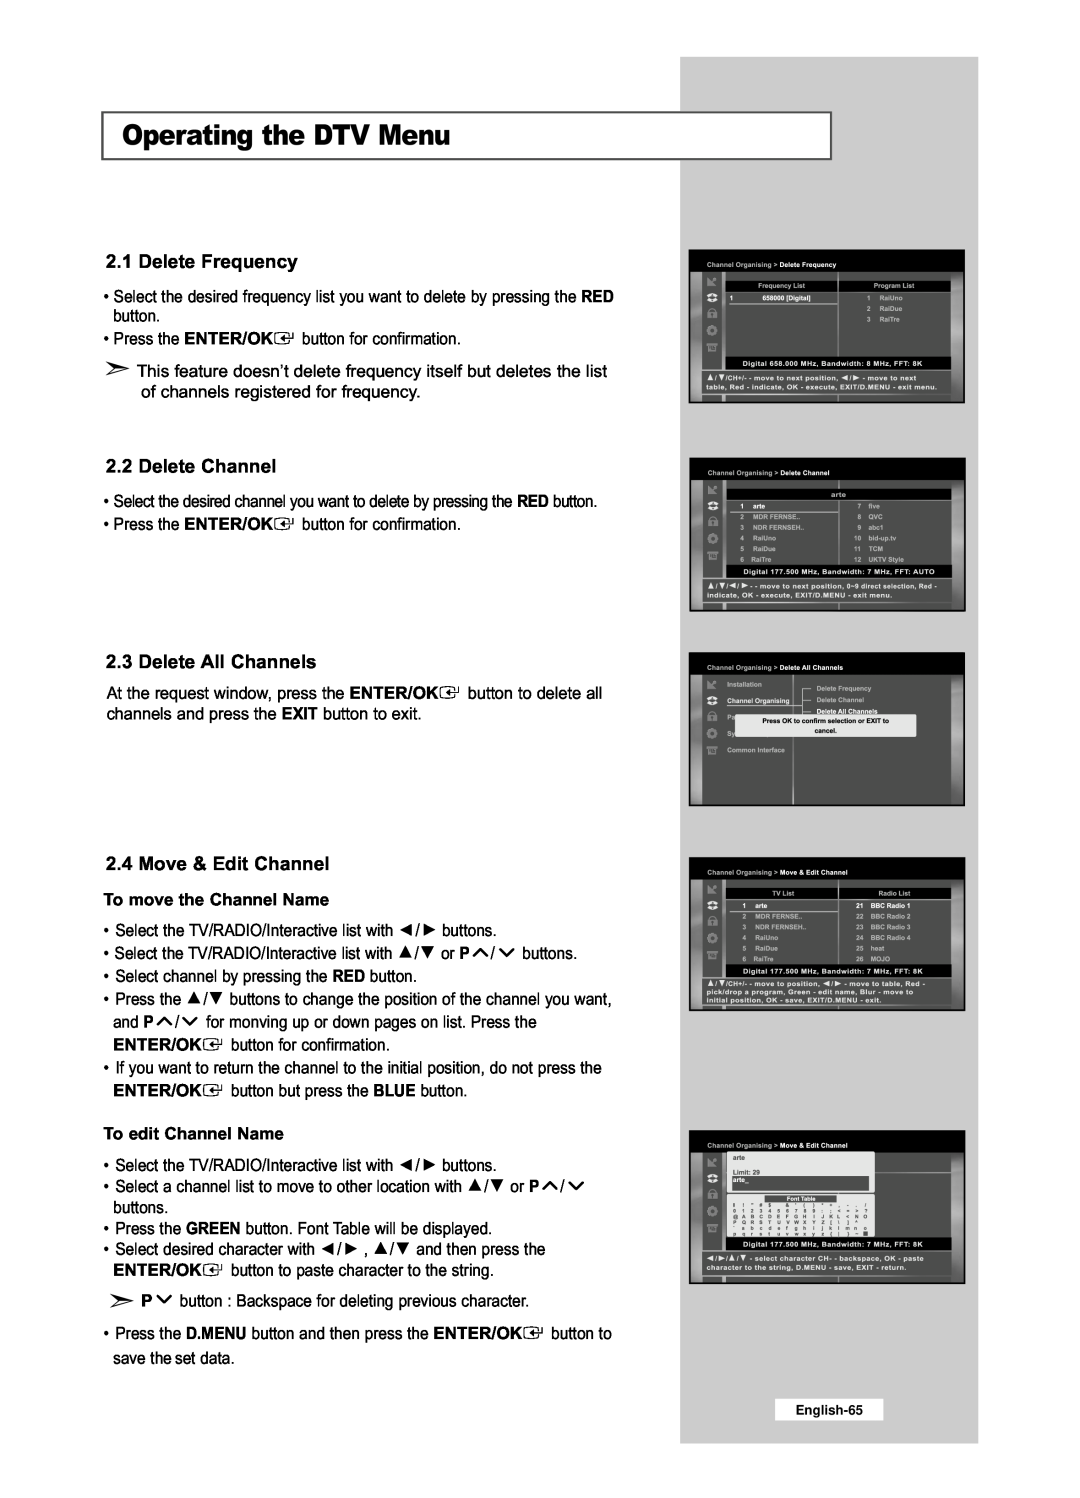 Samsung LE26R53BD Delete Frequency, Delete Channel, Delete All Channels, Move & Edit Channel, To move the Channel Name 